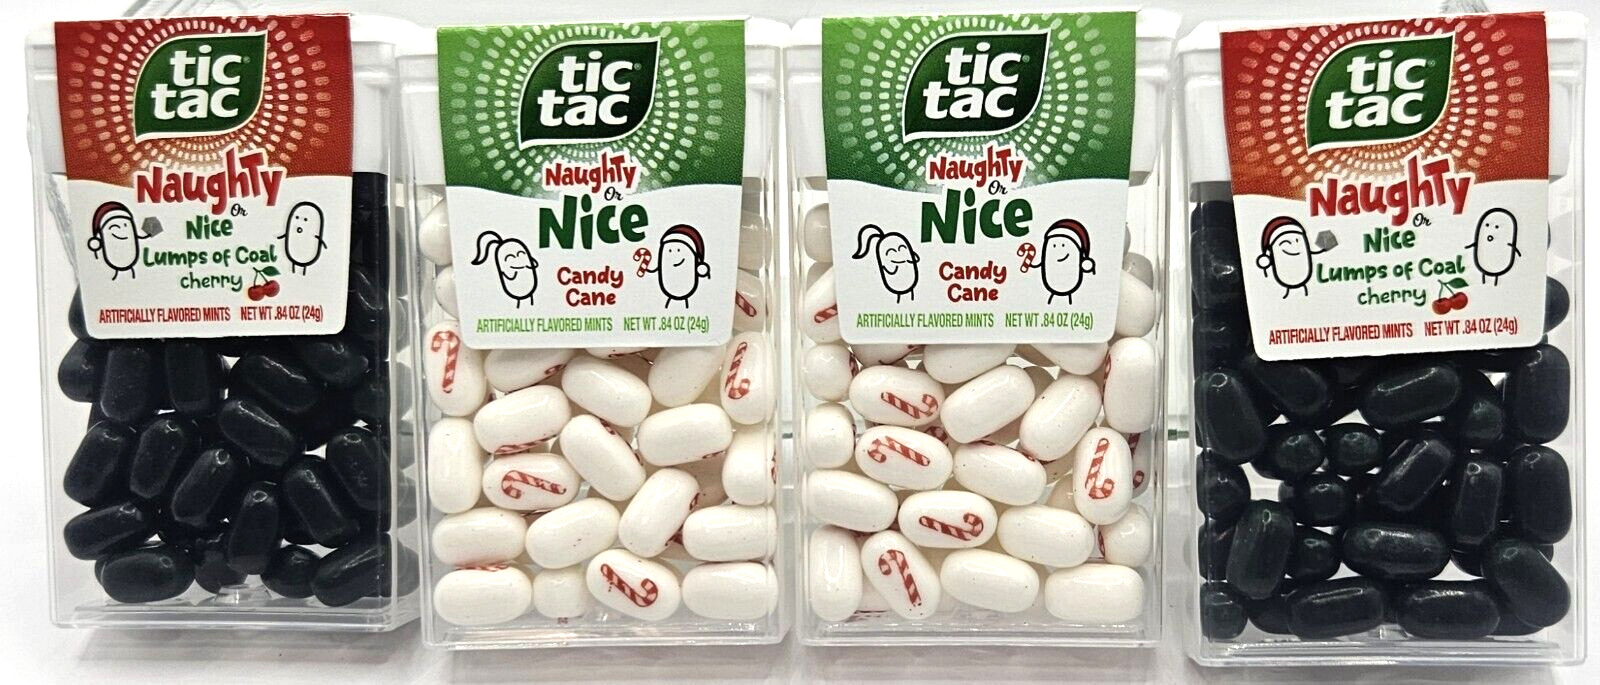 4 Pack~Tic Tac NAUGHTY/NICE Candy Cane/Cherry Christmas Holidays Expire 10&12/24